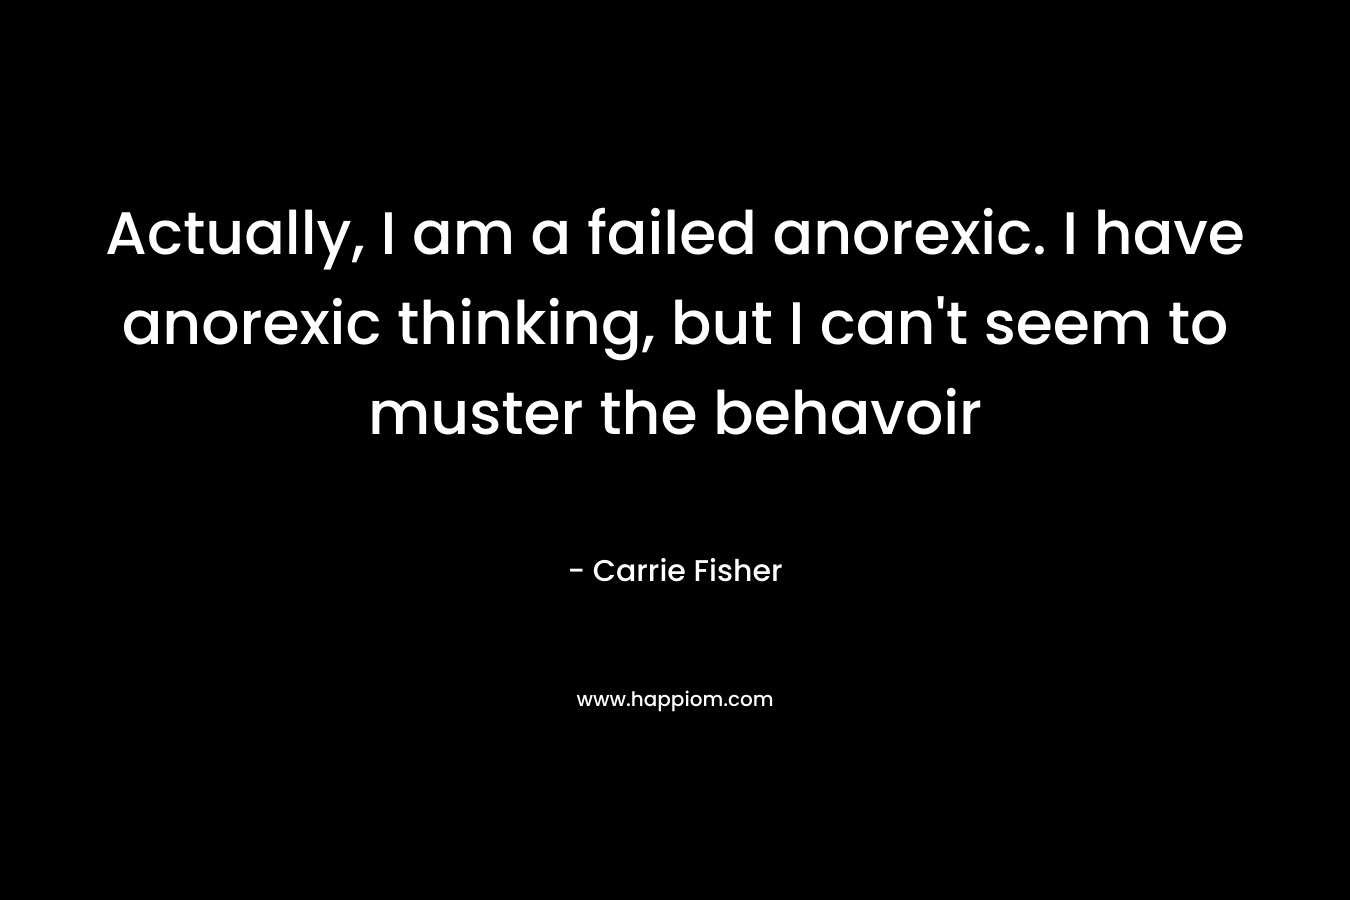 Actually, I am a failed anorexic. I have anorexic thinking, but I can’t seem to muster the behavoir – Carrie Fisher